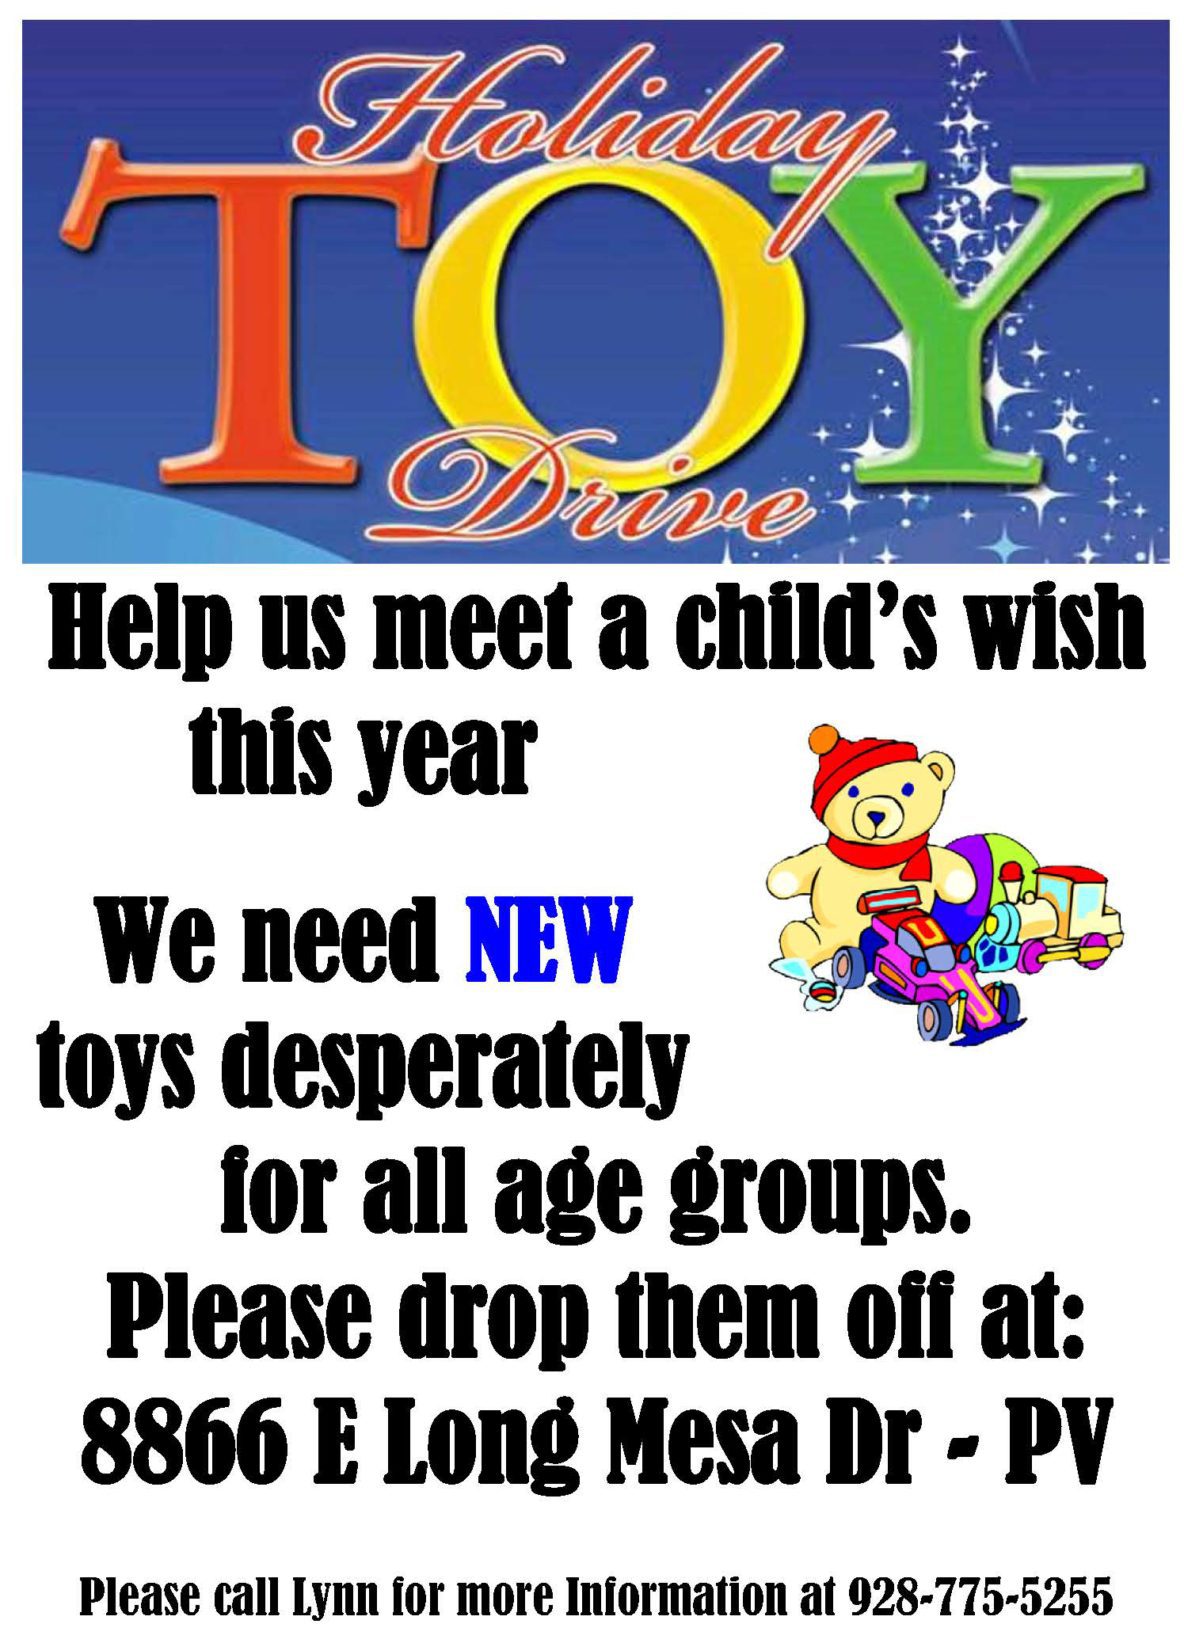 Toy Drive for Holidays Yavapai County Food Bank